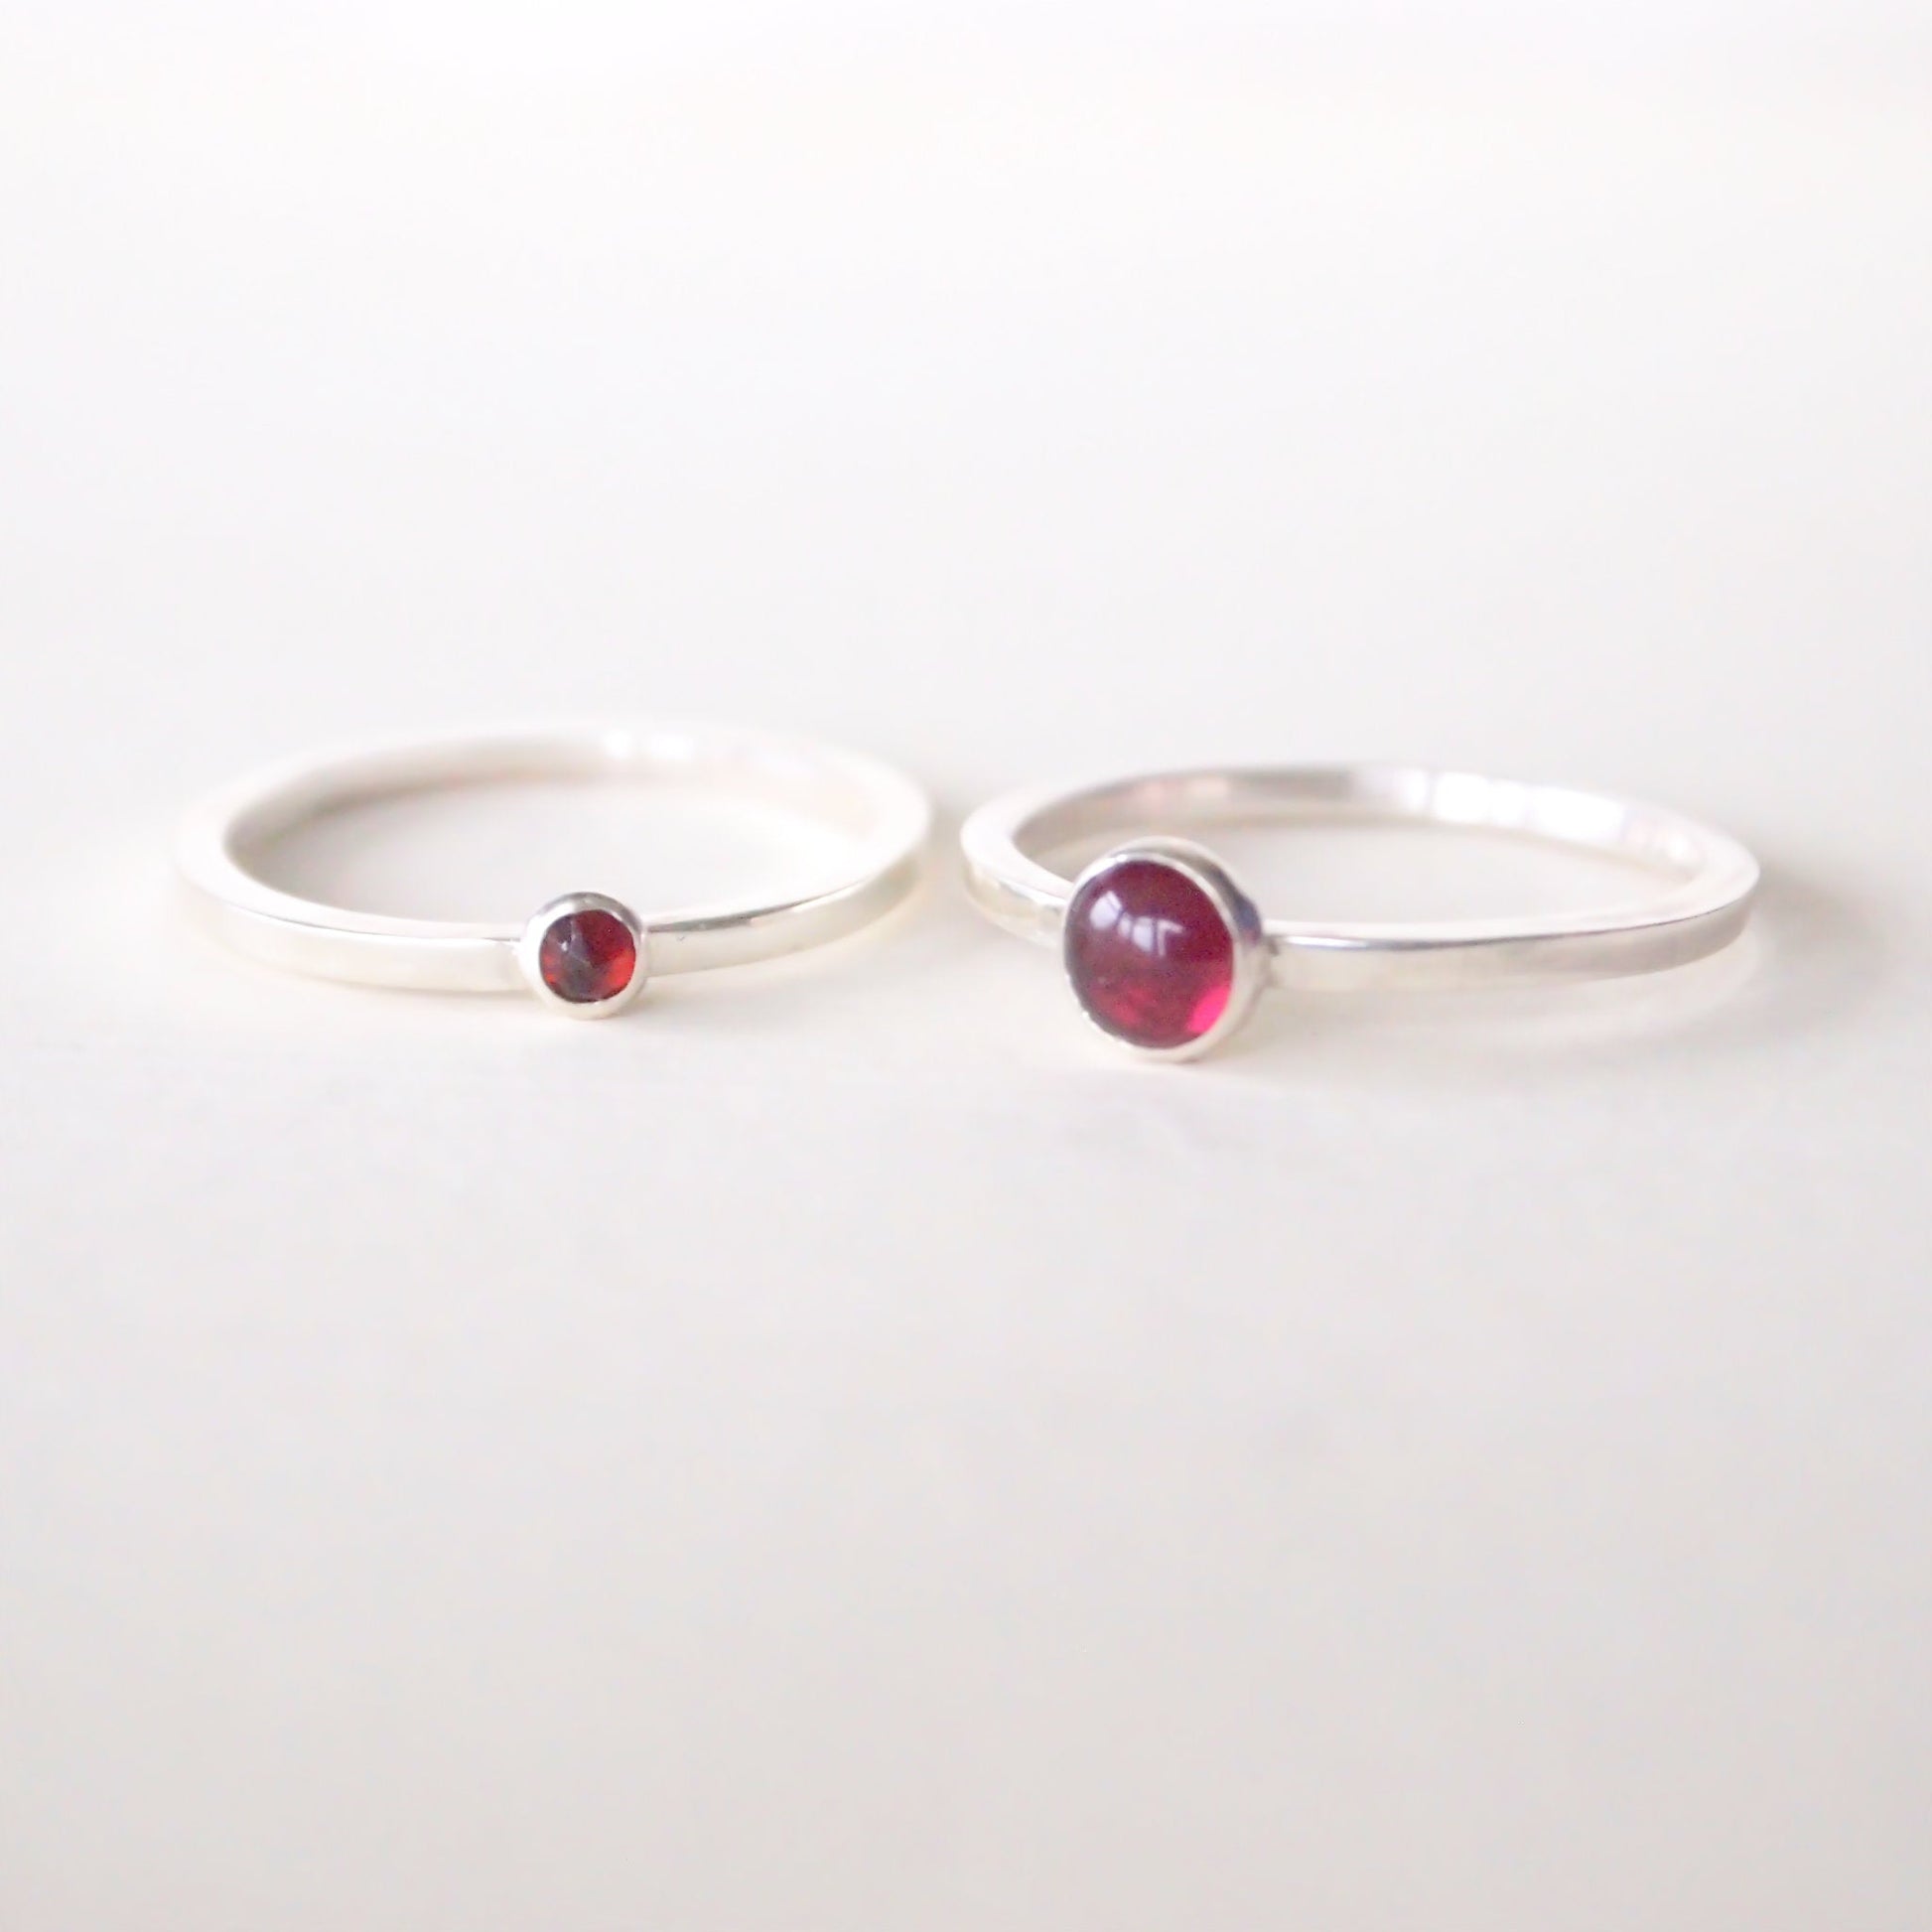 Two Sterling Silver and garnet rings side by side, one with a 5mm round gem and on with a 3mm round faceted gemstone. modern birthstones rings that can be stacked together, handcrafted by maram jewellery in Scotland UK